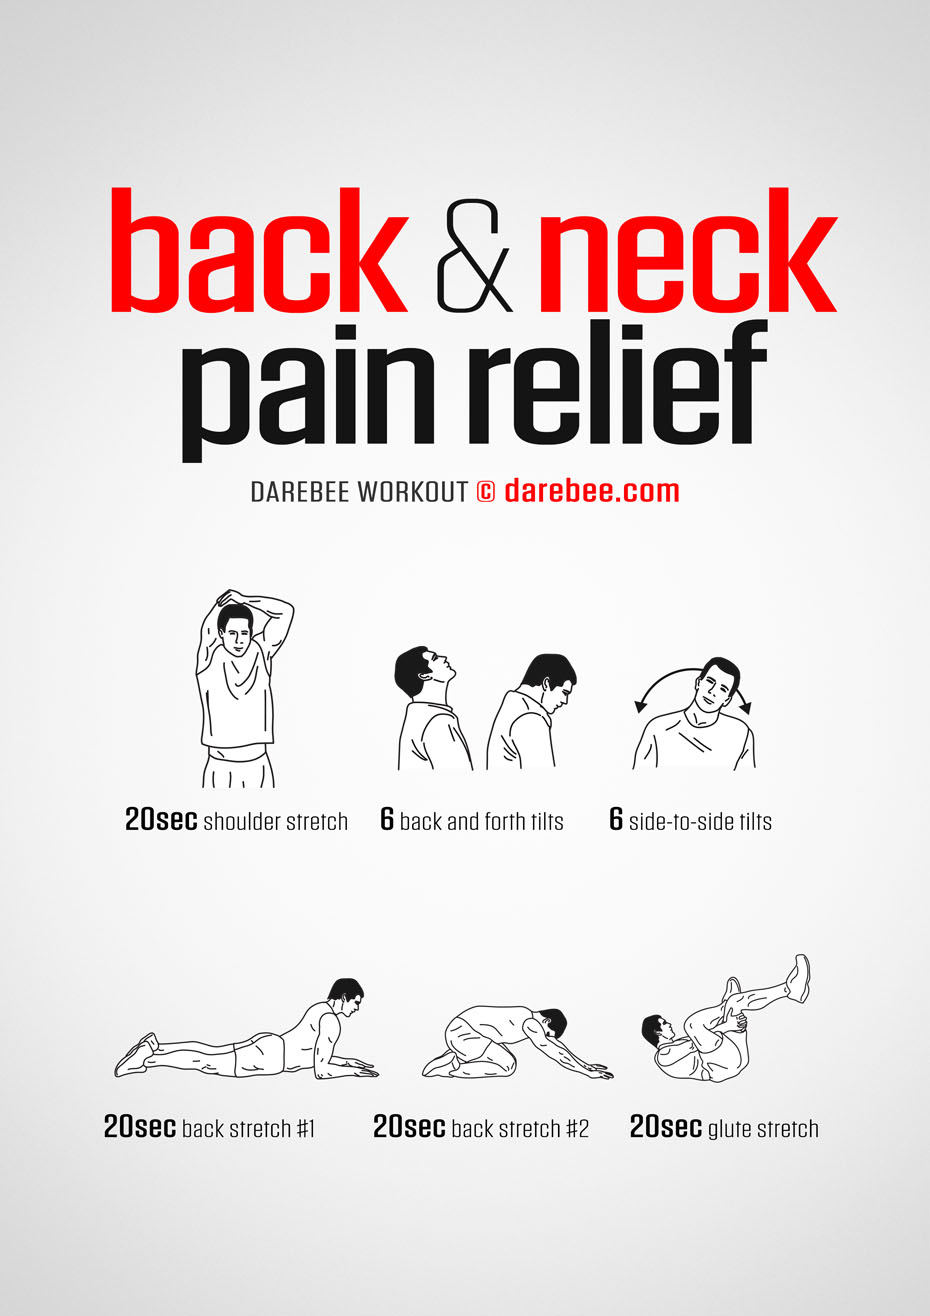 https://darebee.com/images/workouts/back-and-neck-pain-relief-workout.jpg